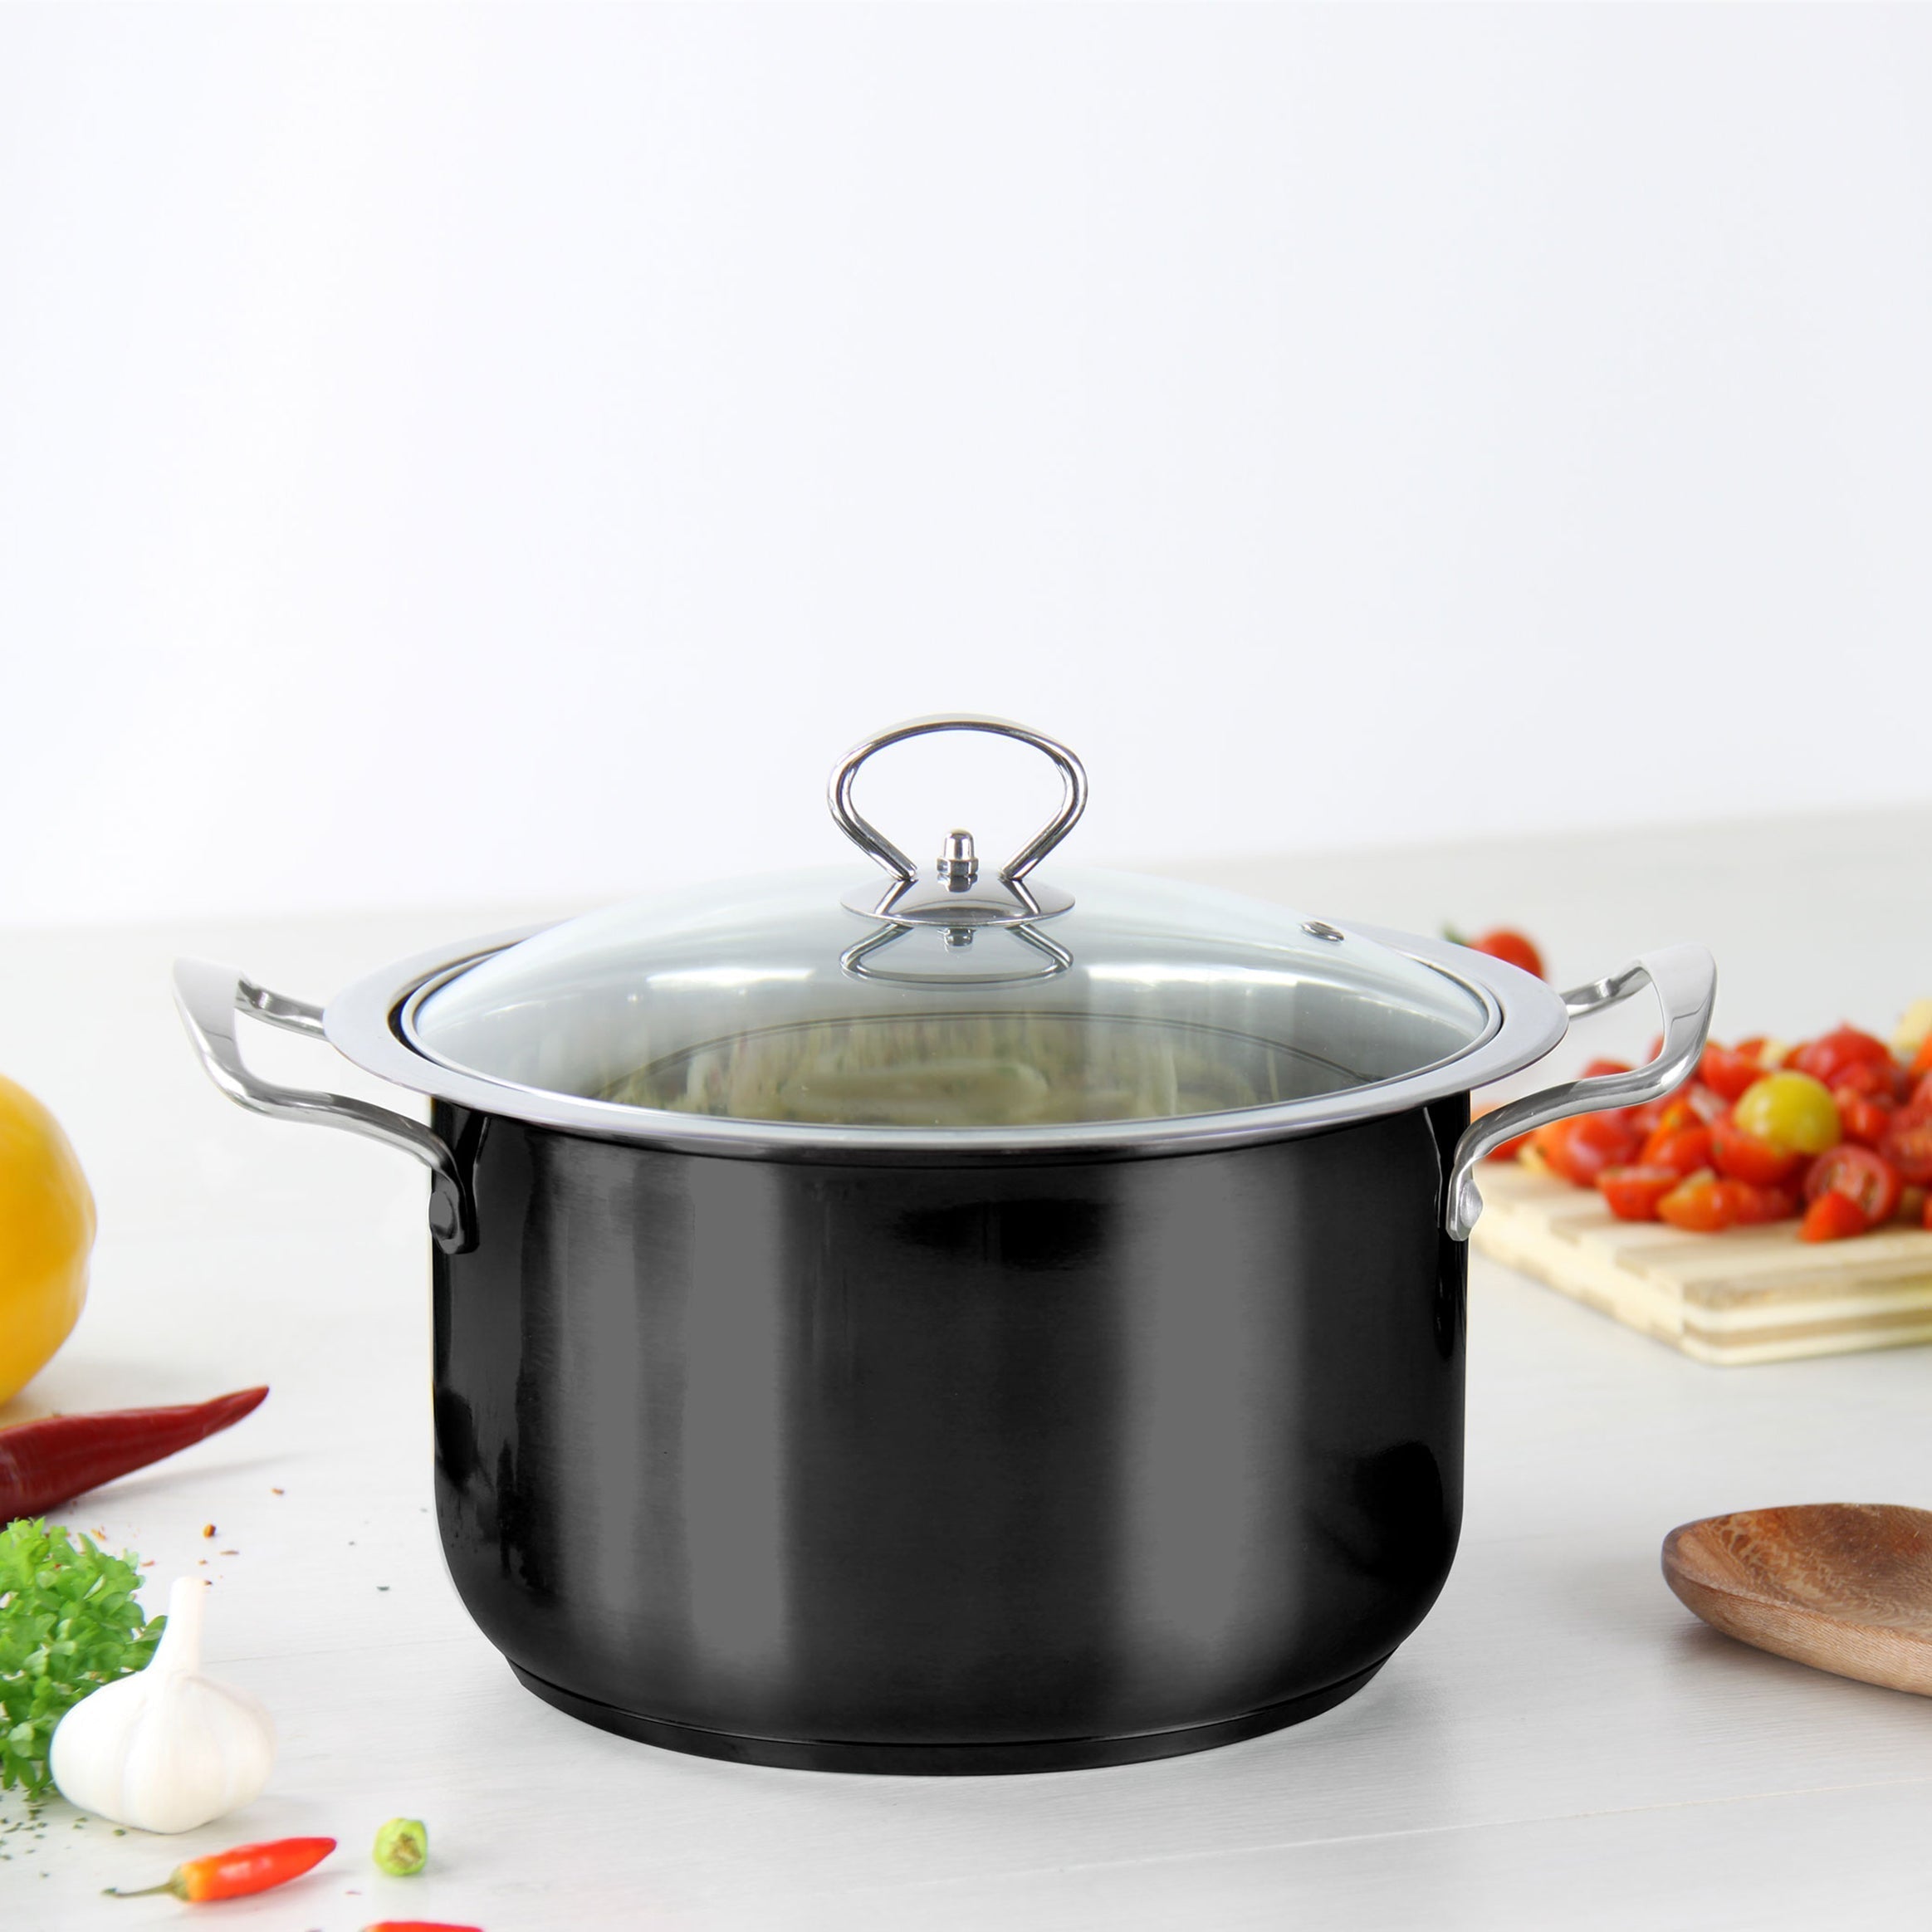 Stainless Steel Stockpot - Induction Base - ONYX - 24cm